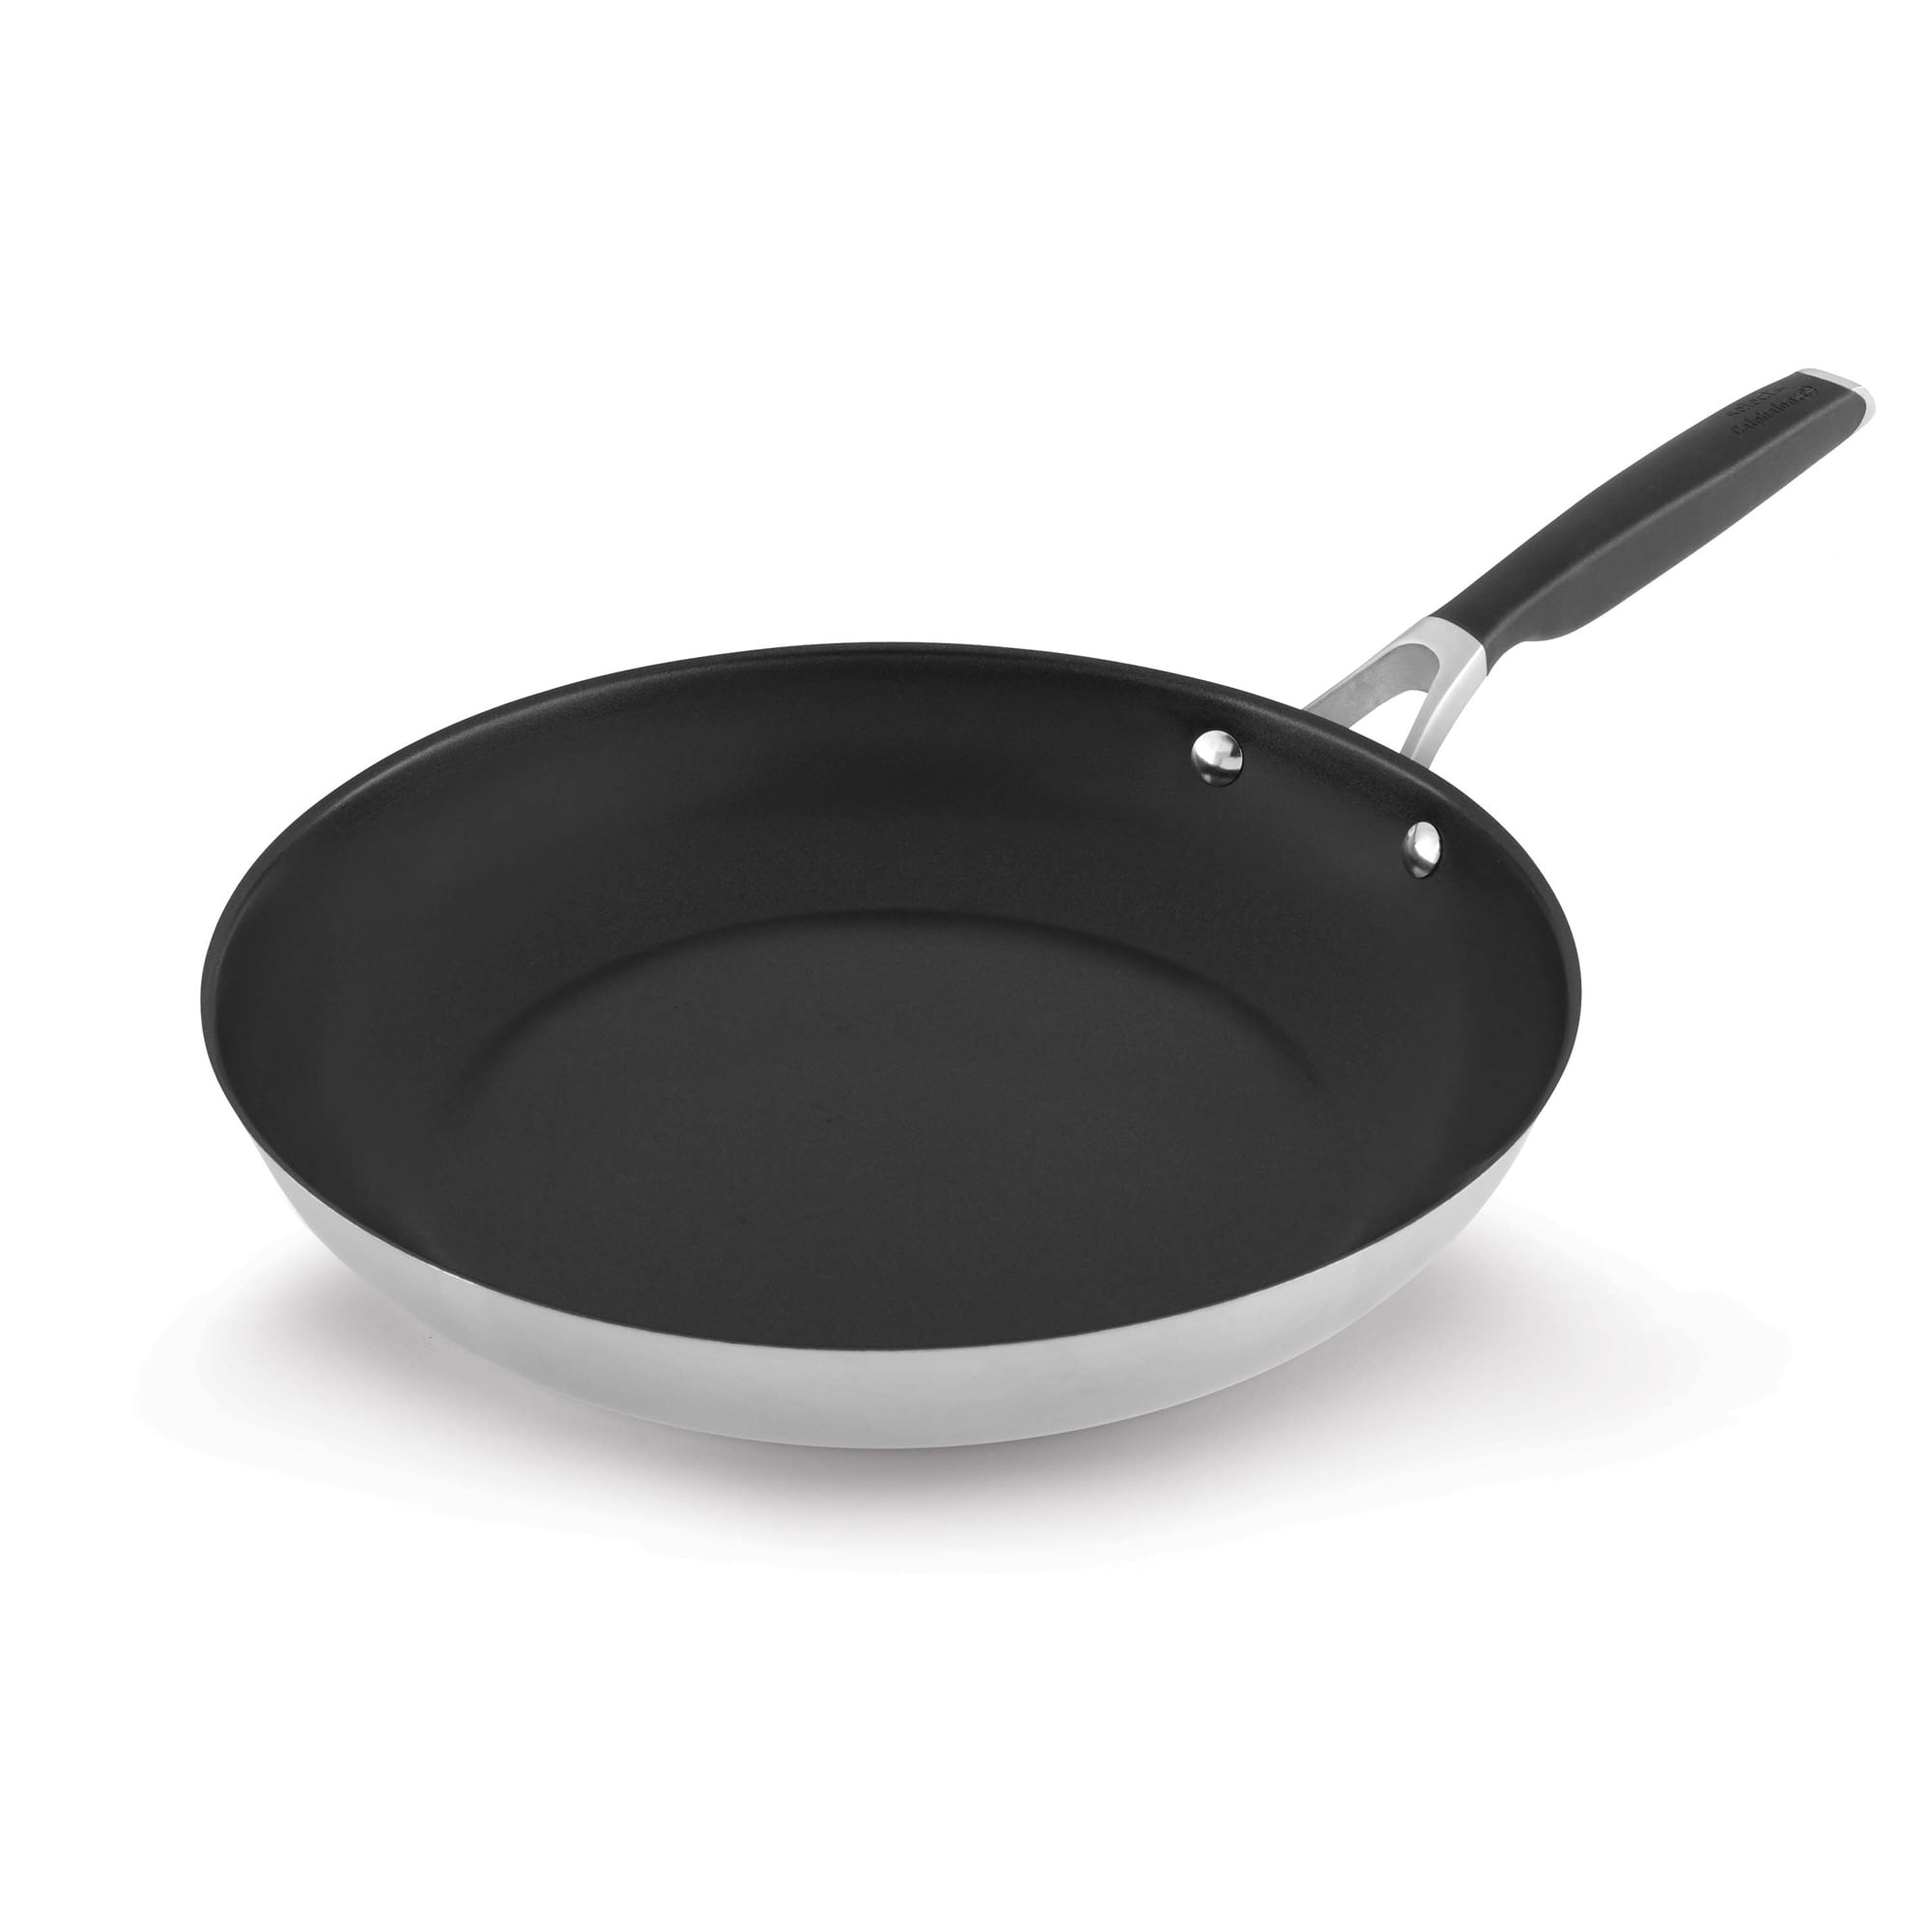 Select by Calphalon Stainless Steel Nonstick 12-Inch Fry Pan - Walmart Calphalon Stainless Steel Frying Pan